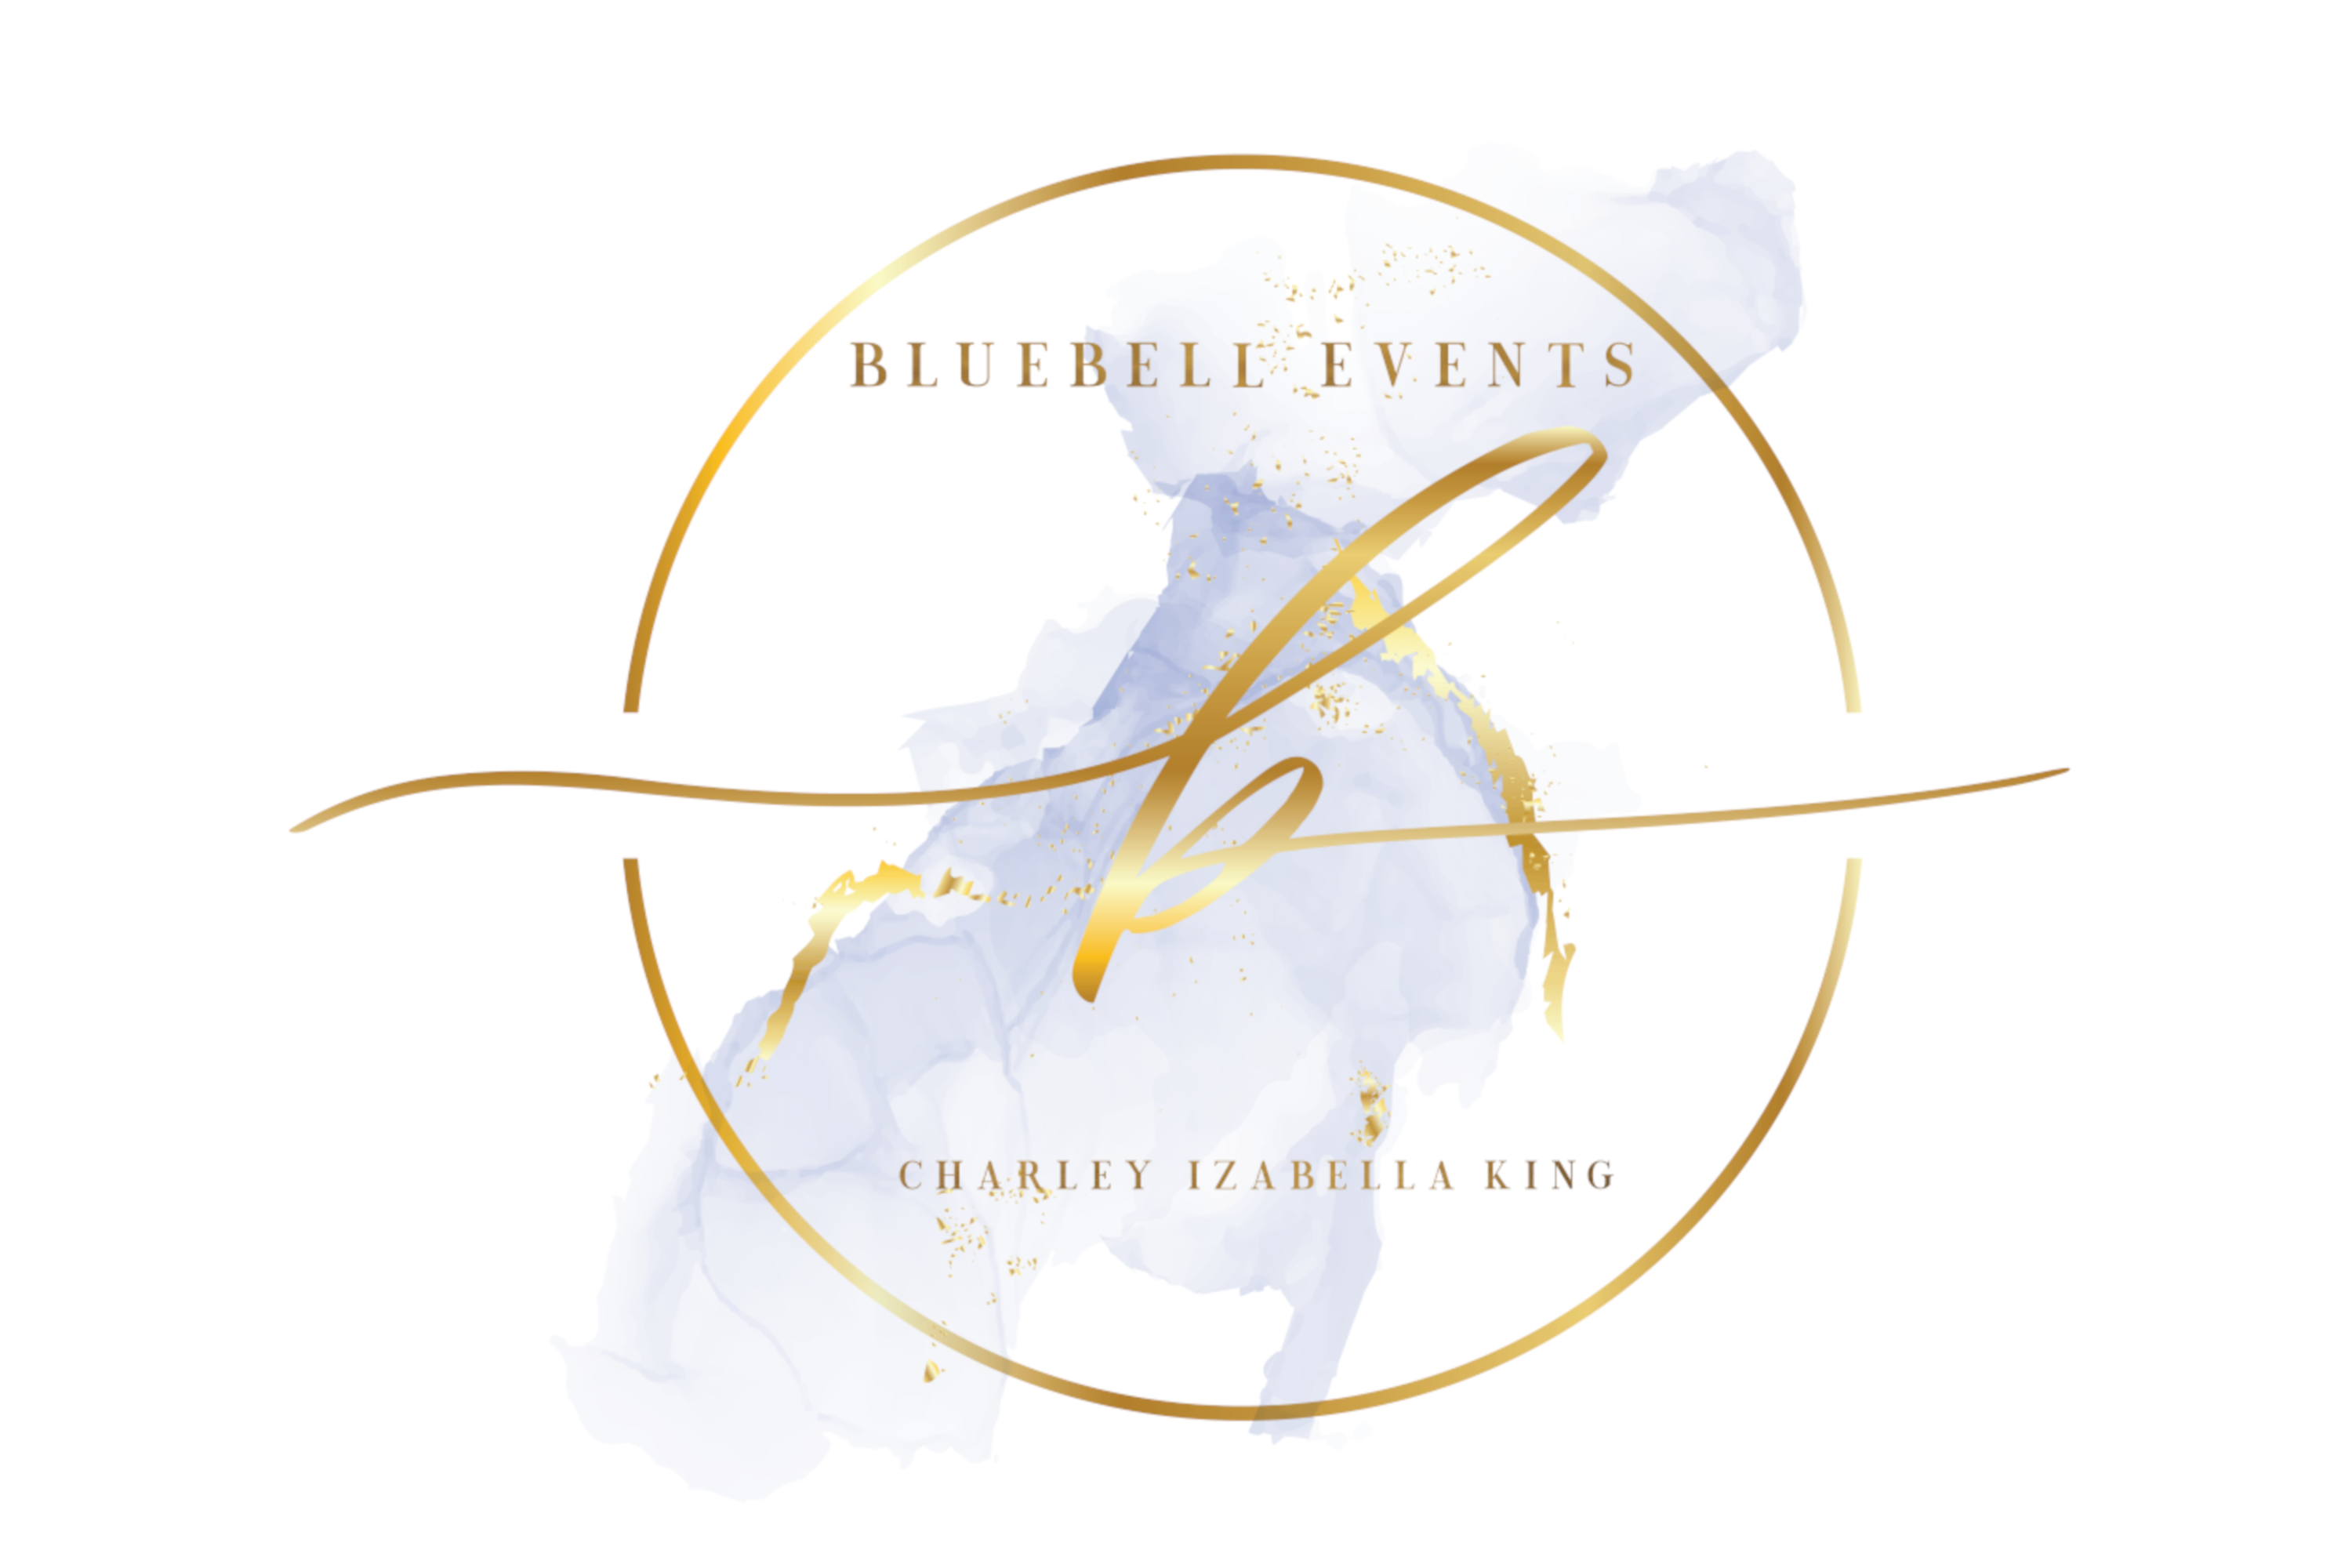 Bluebell Events logo with purple water color and gold lettering